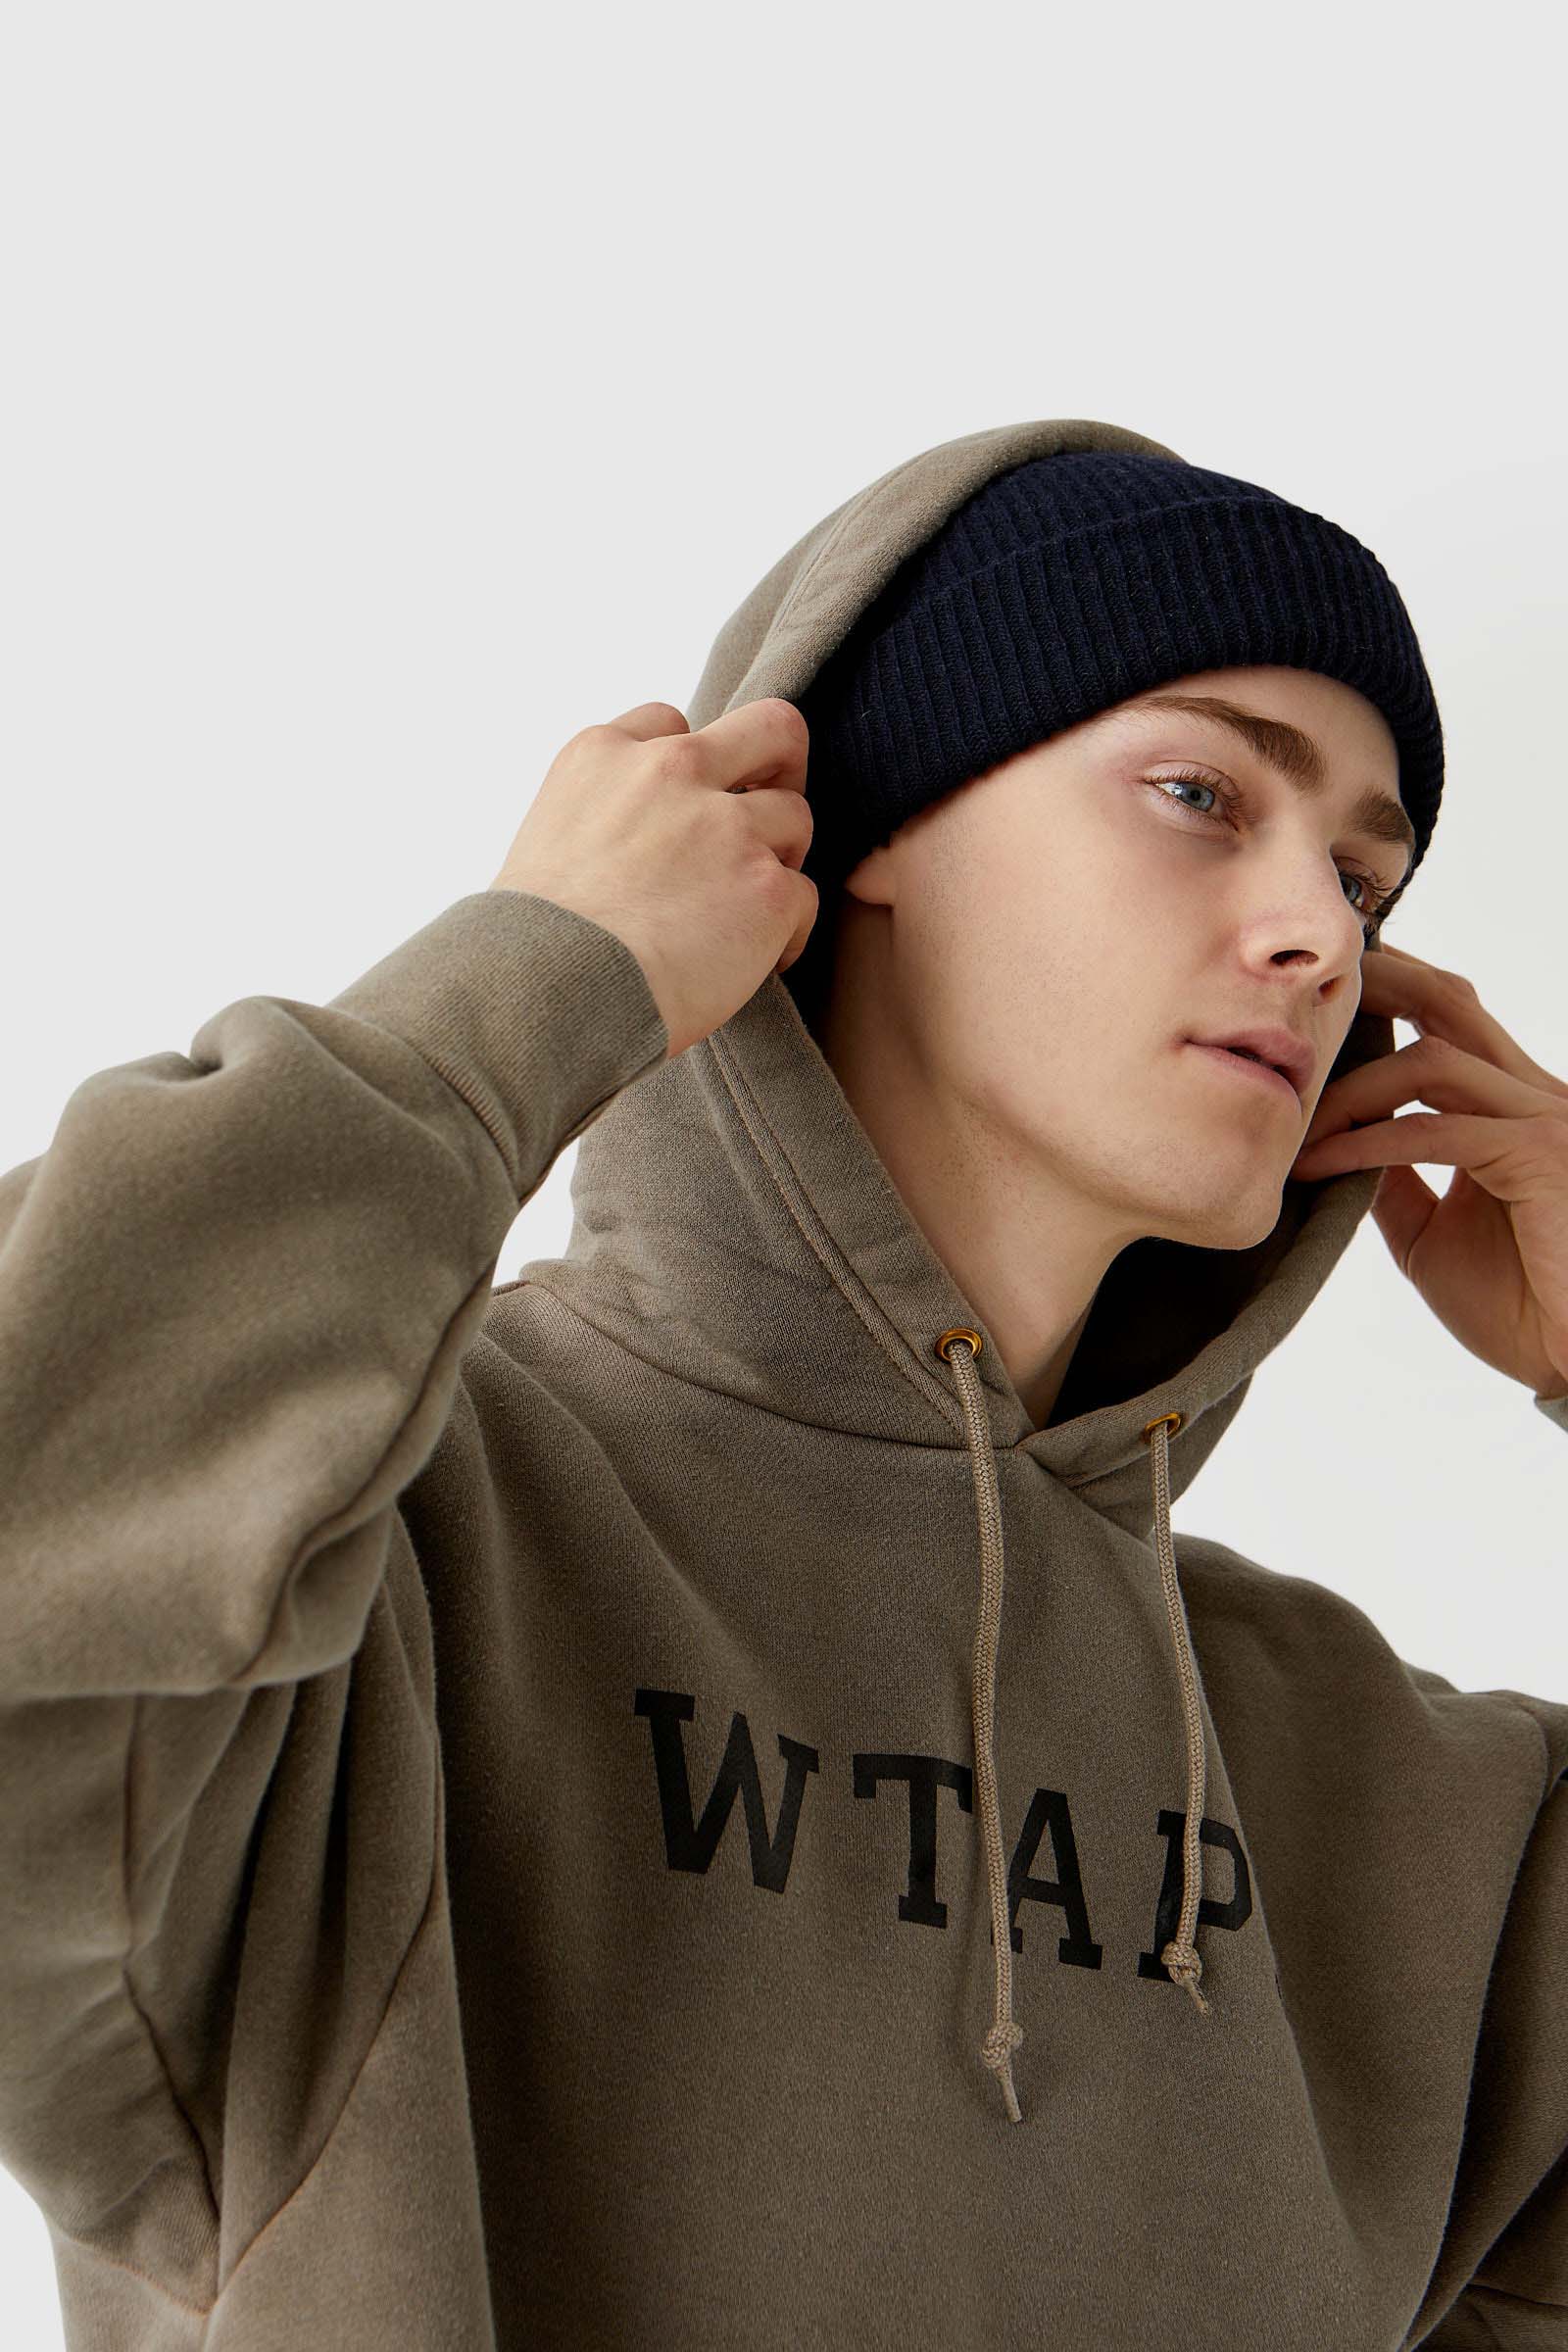 WTAPS College. Design Hooded Olive drab | WoodWood.com